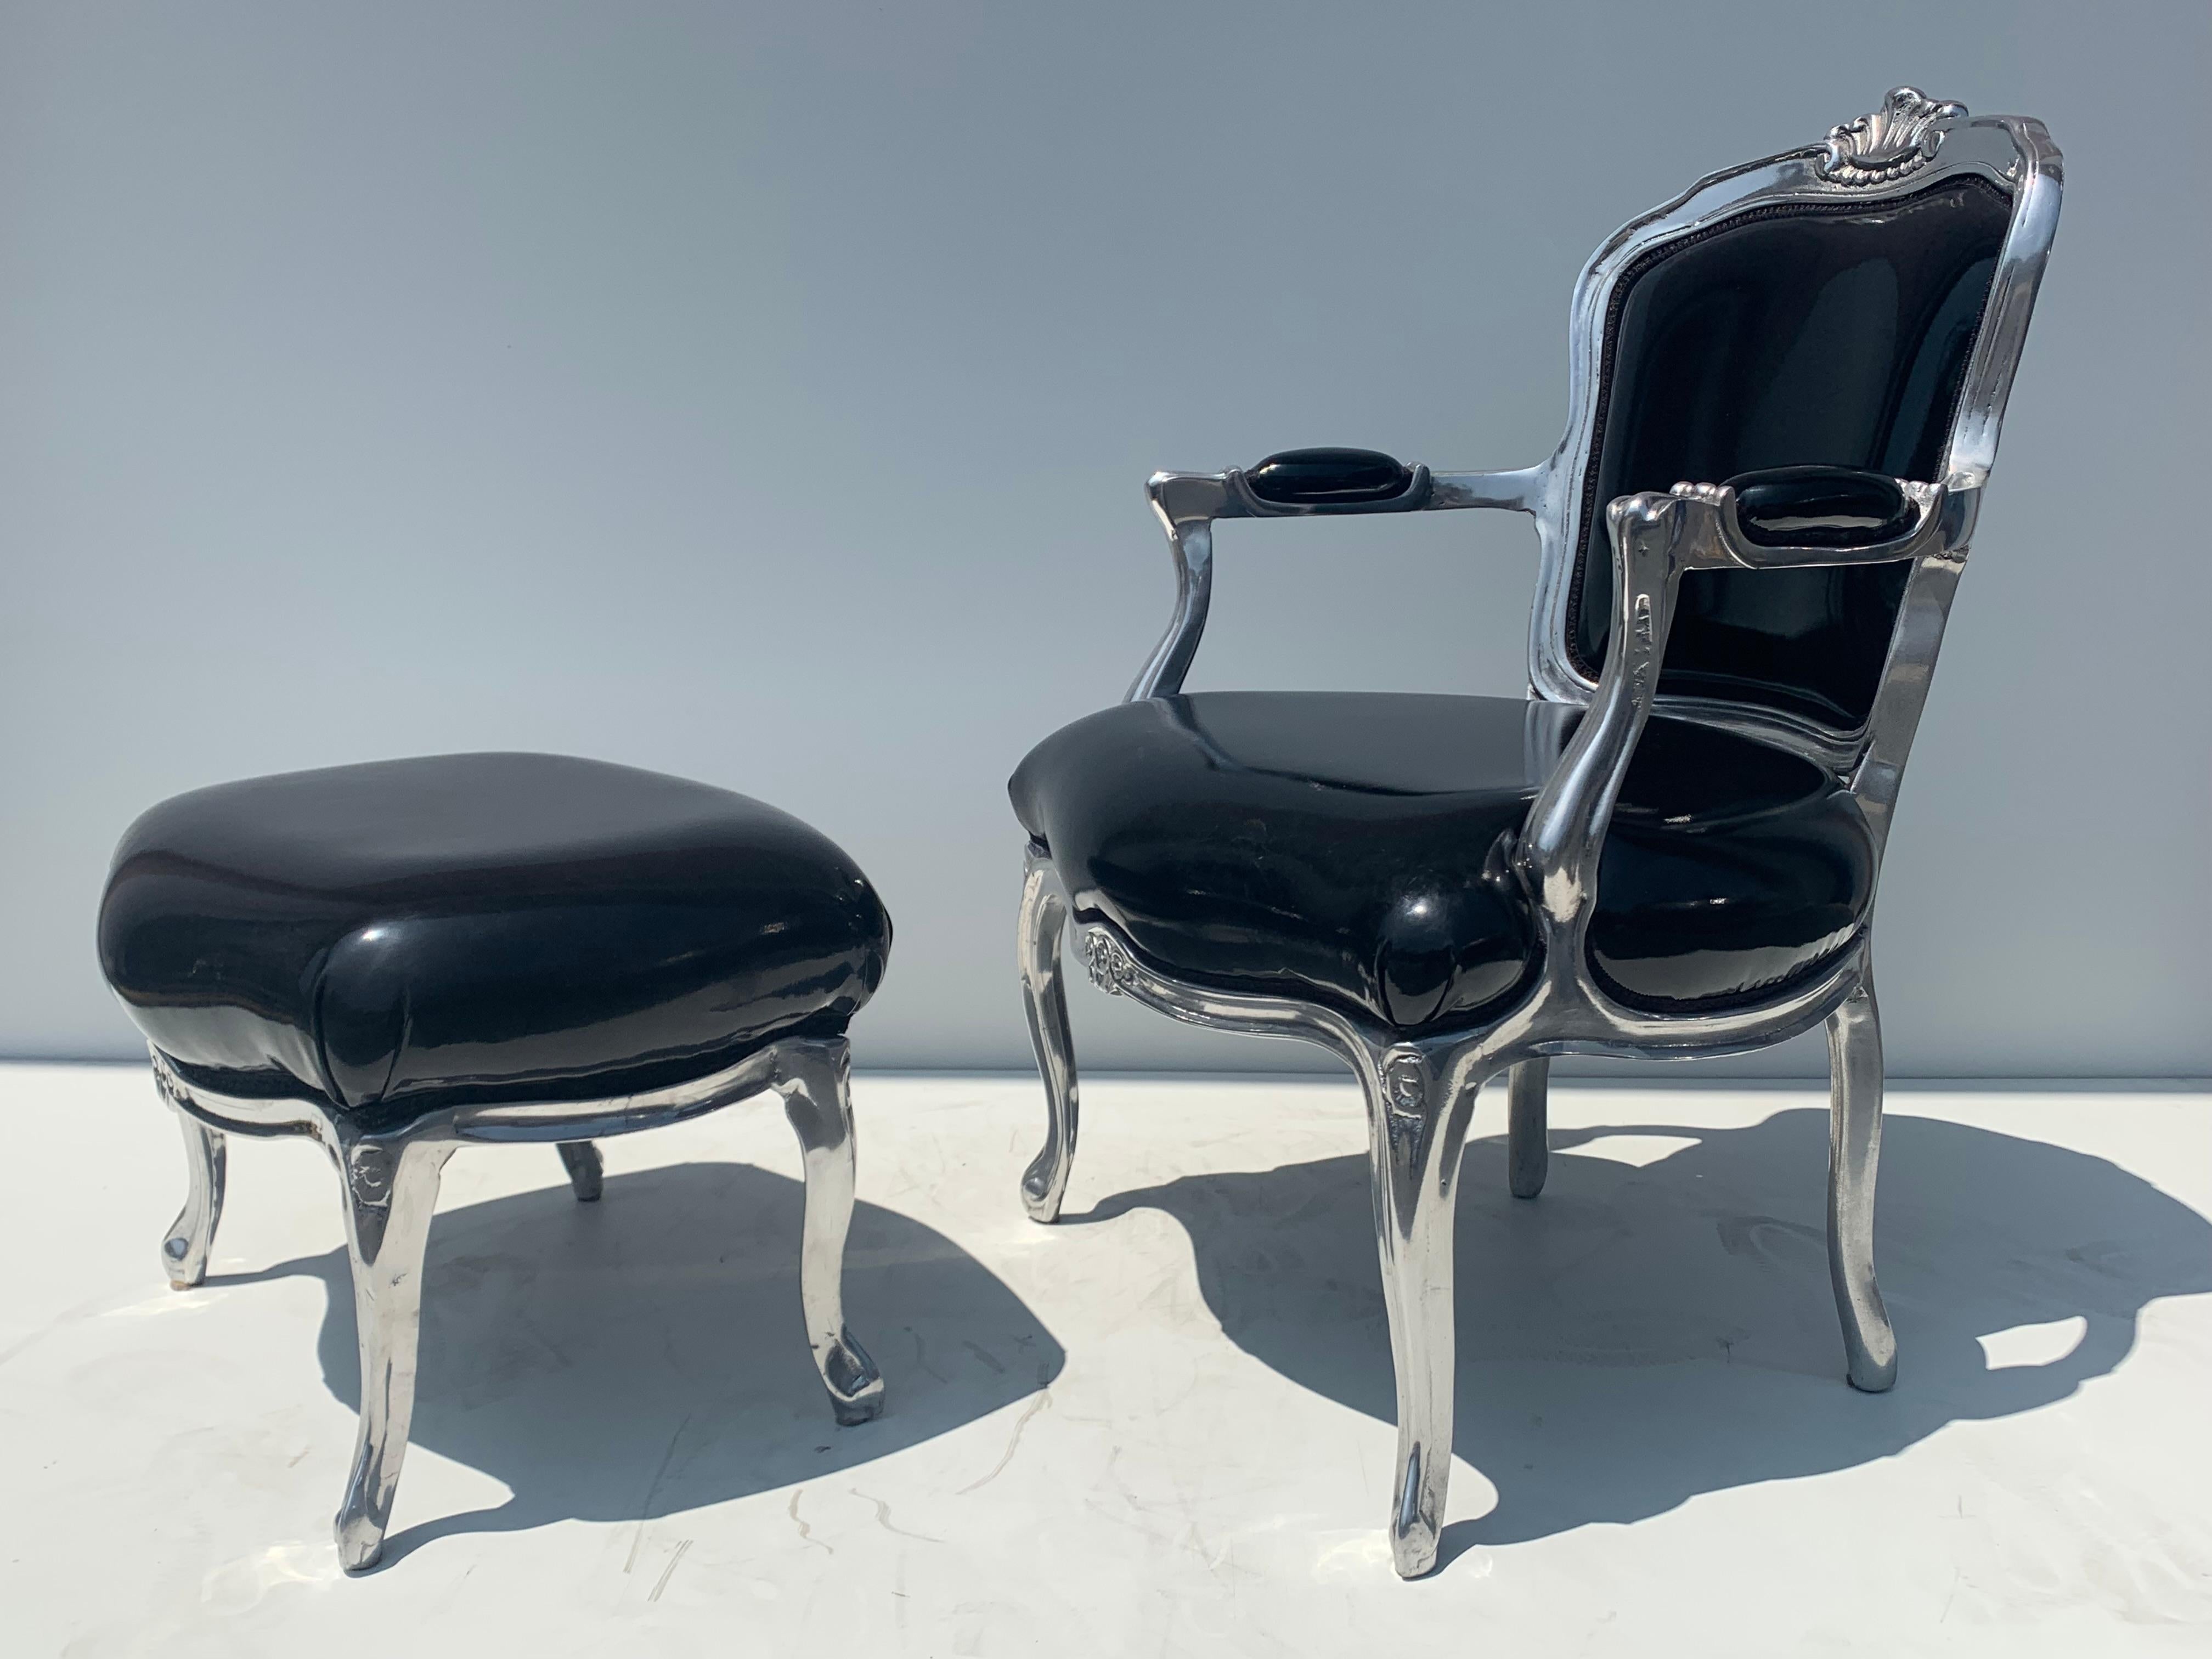 Fauteuil chair and footrest in solid aluminum upholstered in black soft vinyl in he style of Louis XV. Footrest is 23